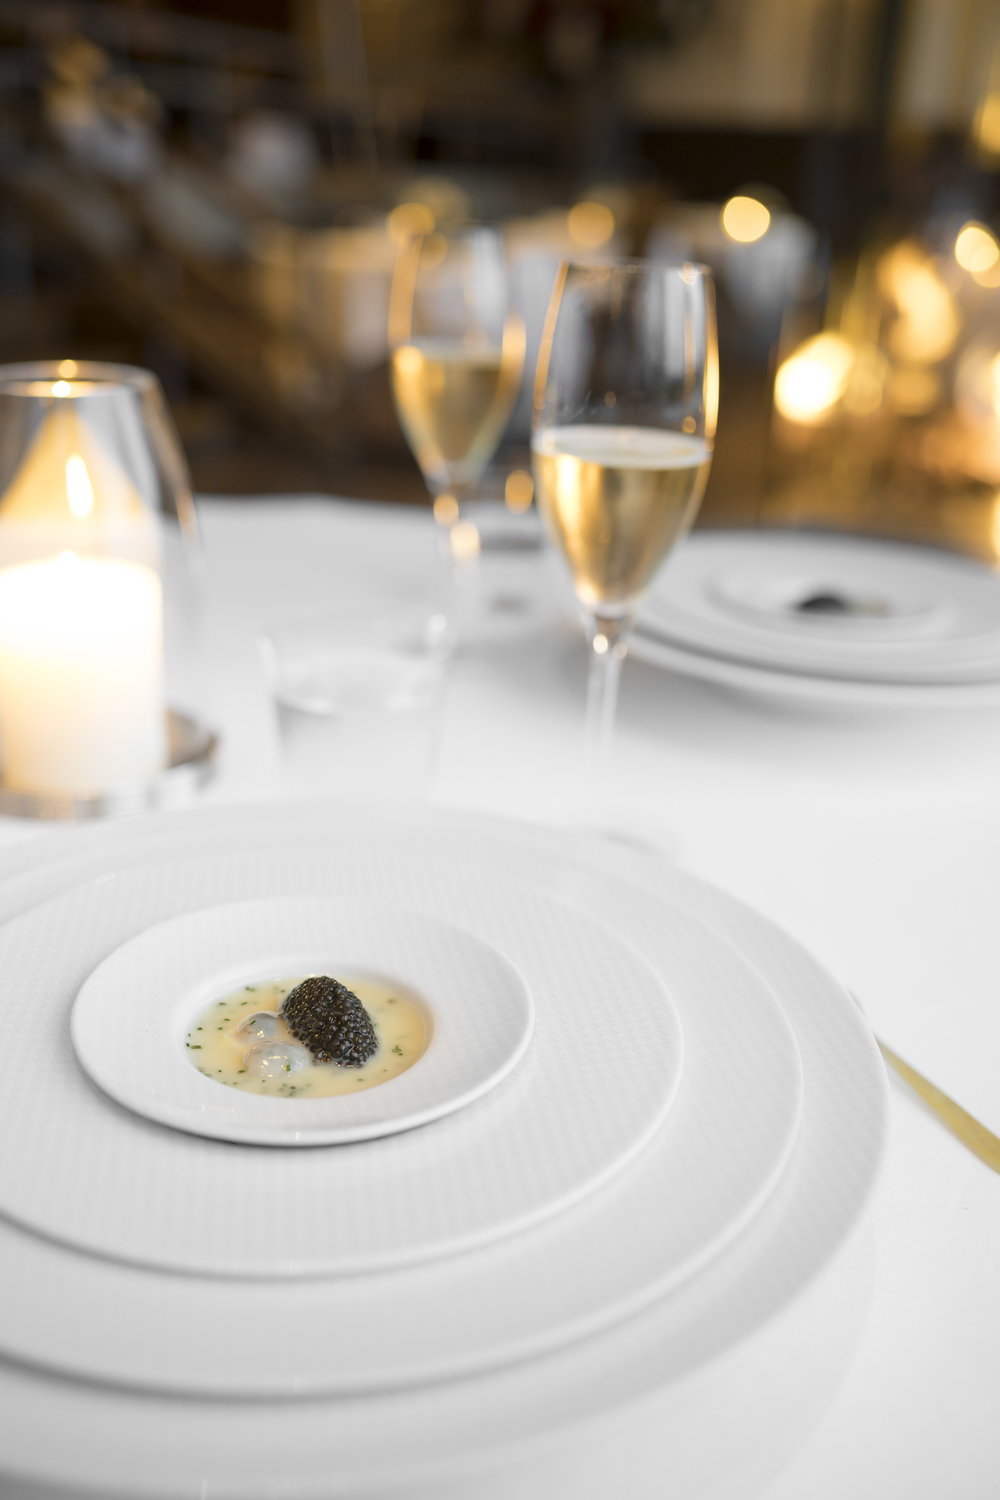 Oysters and Pearls. "Sabayon" of Pearl Tapioca with Island Creek Oysters and Regiis Ova Caviar.